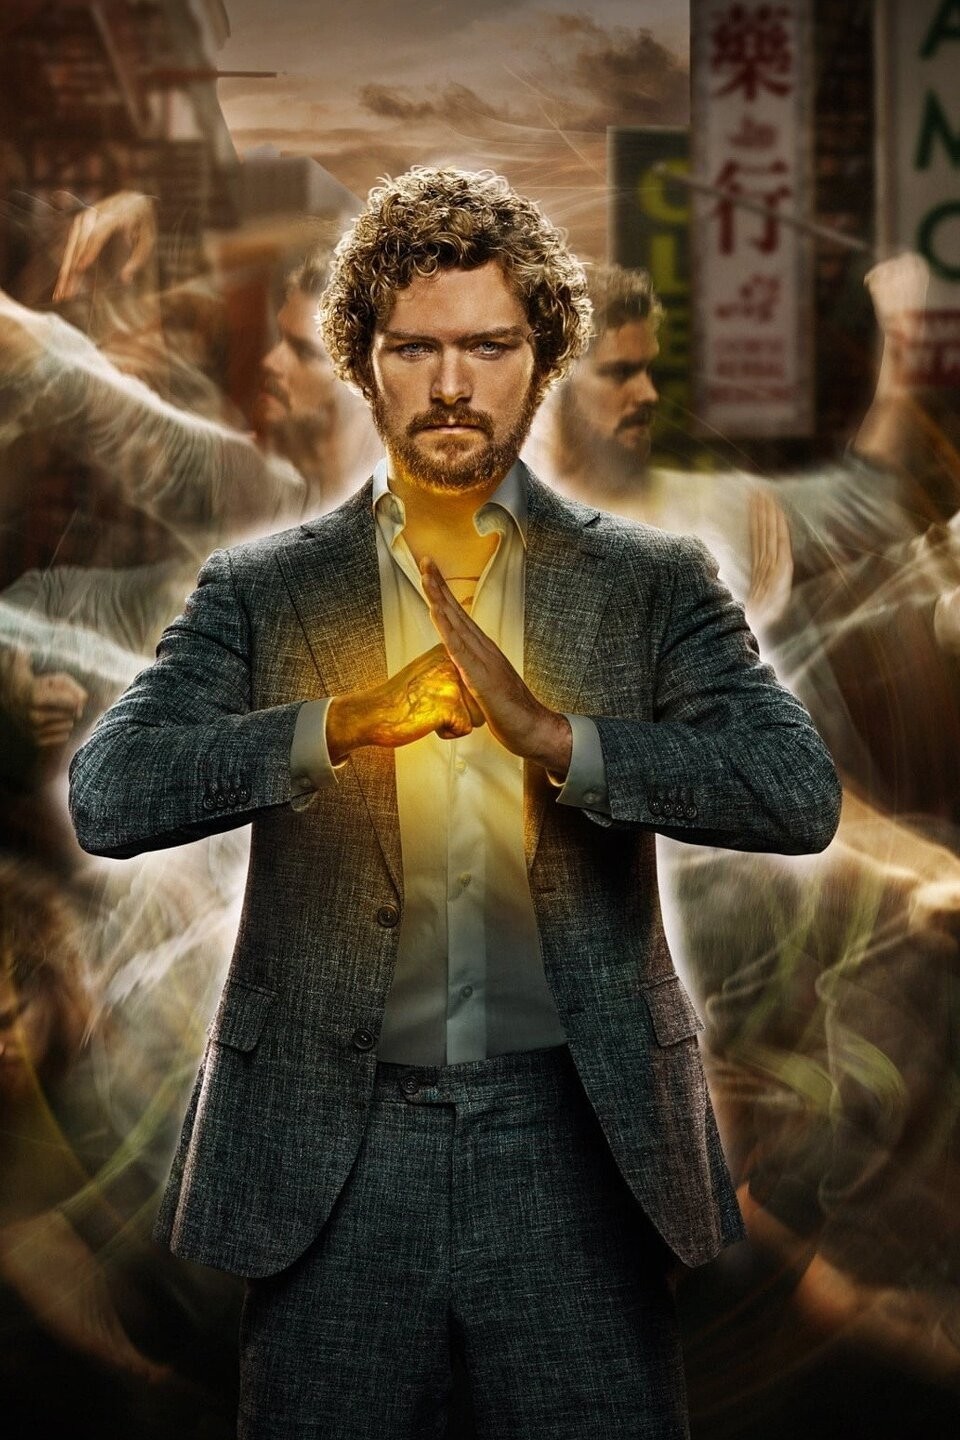 Iron Fist' Season 2 Teaser: Marvel's Controversial Series Returns –  IndieWire